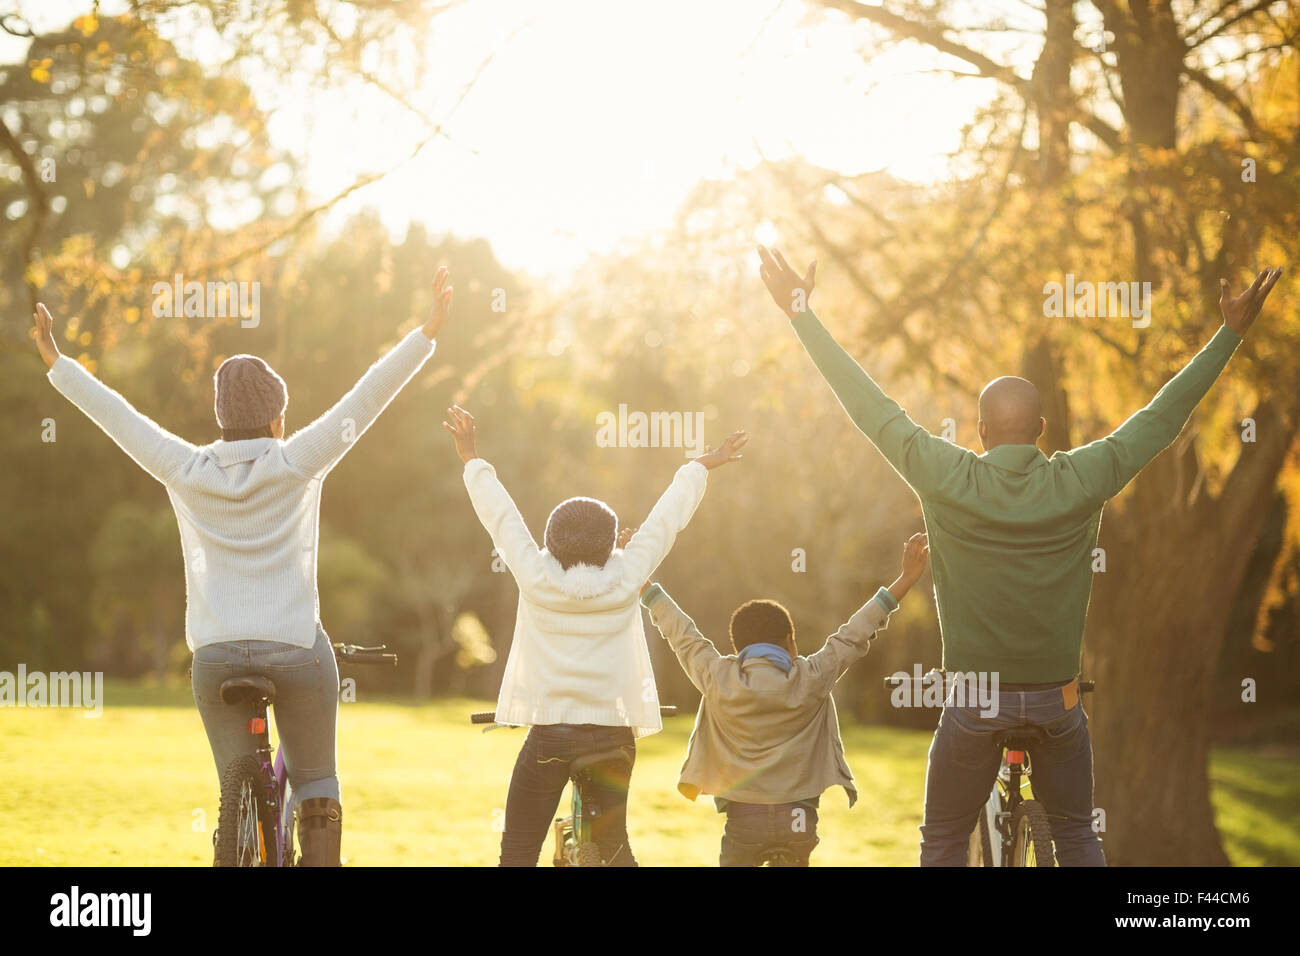 Rear view of a young family with arms raised on bike Stock Photo